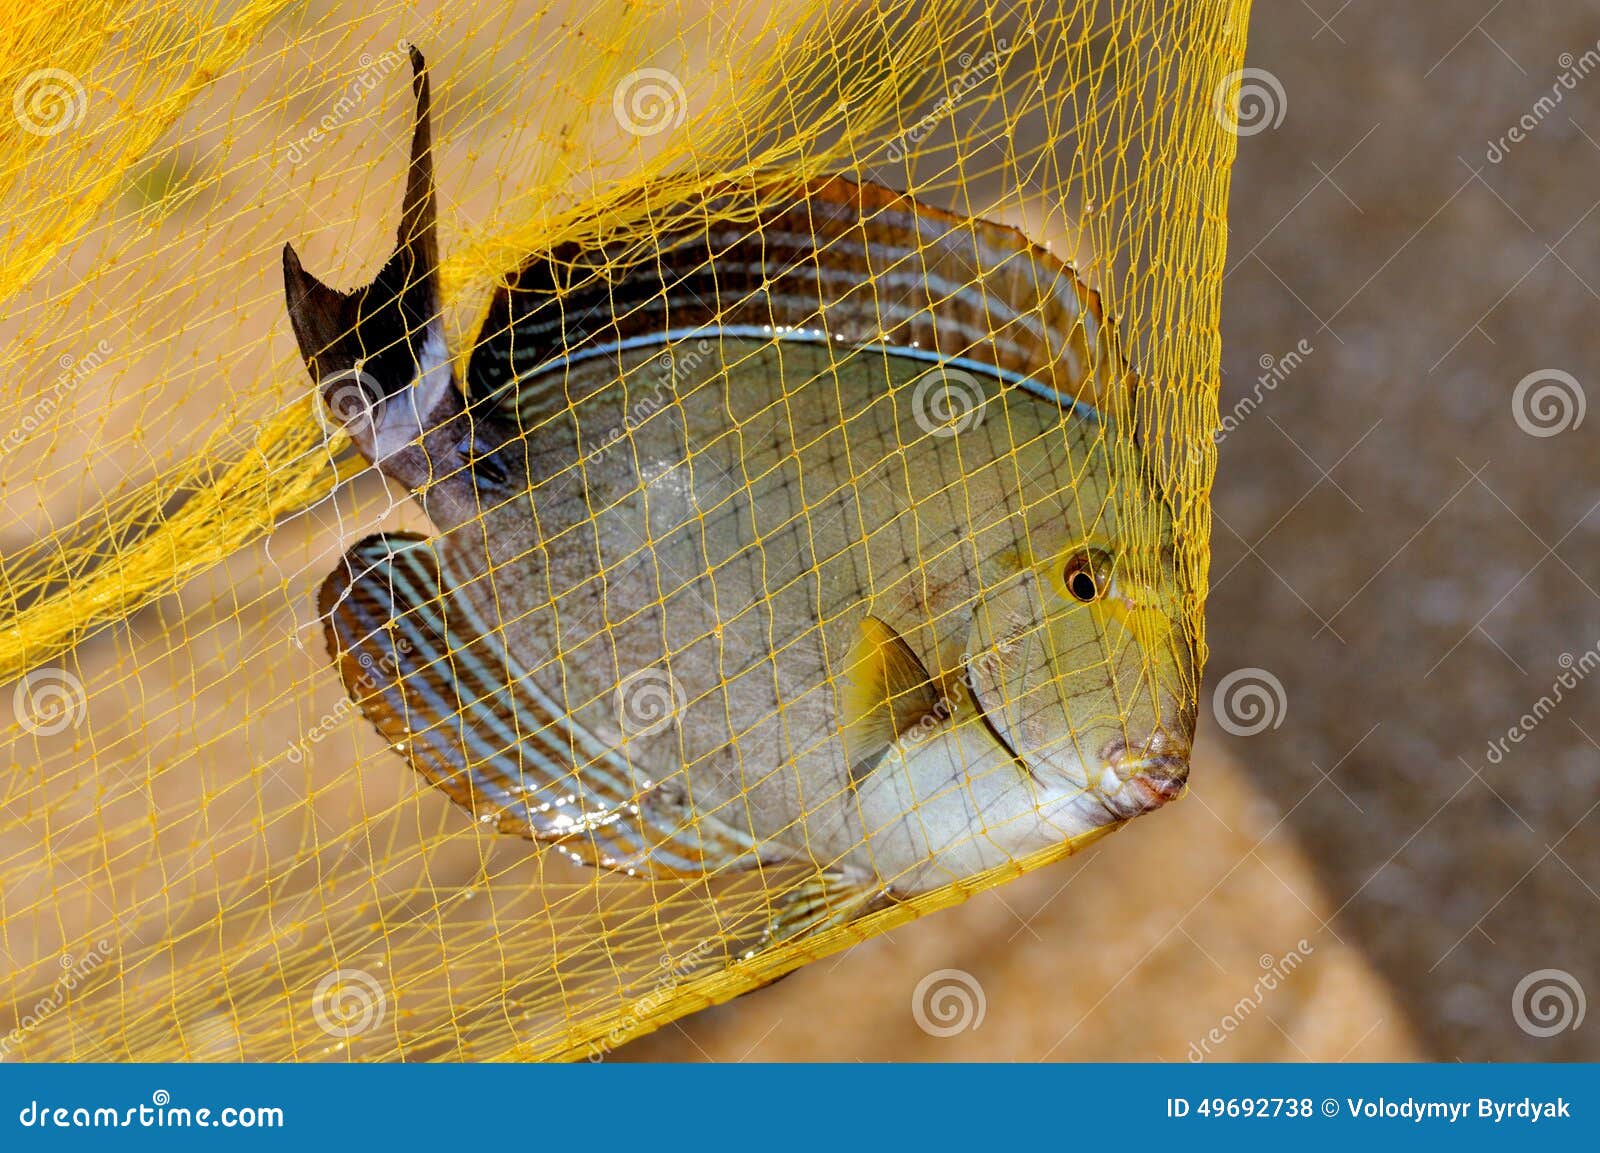 Fish in a fishing nets stock photo. Image of people, hand - 49692738